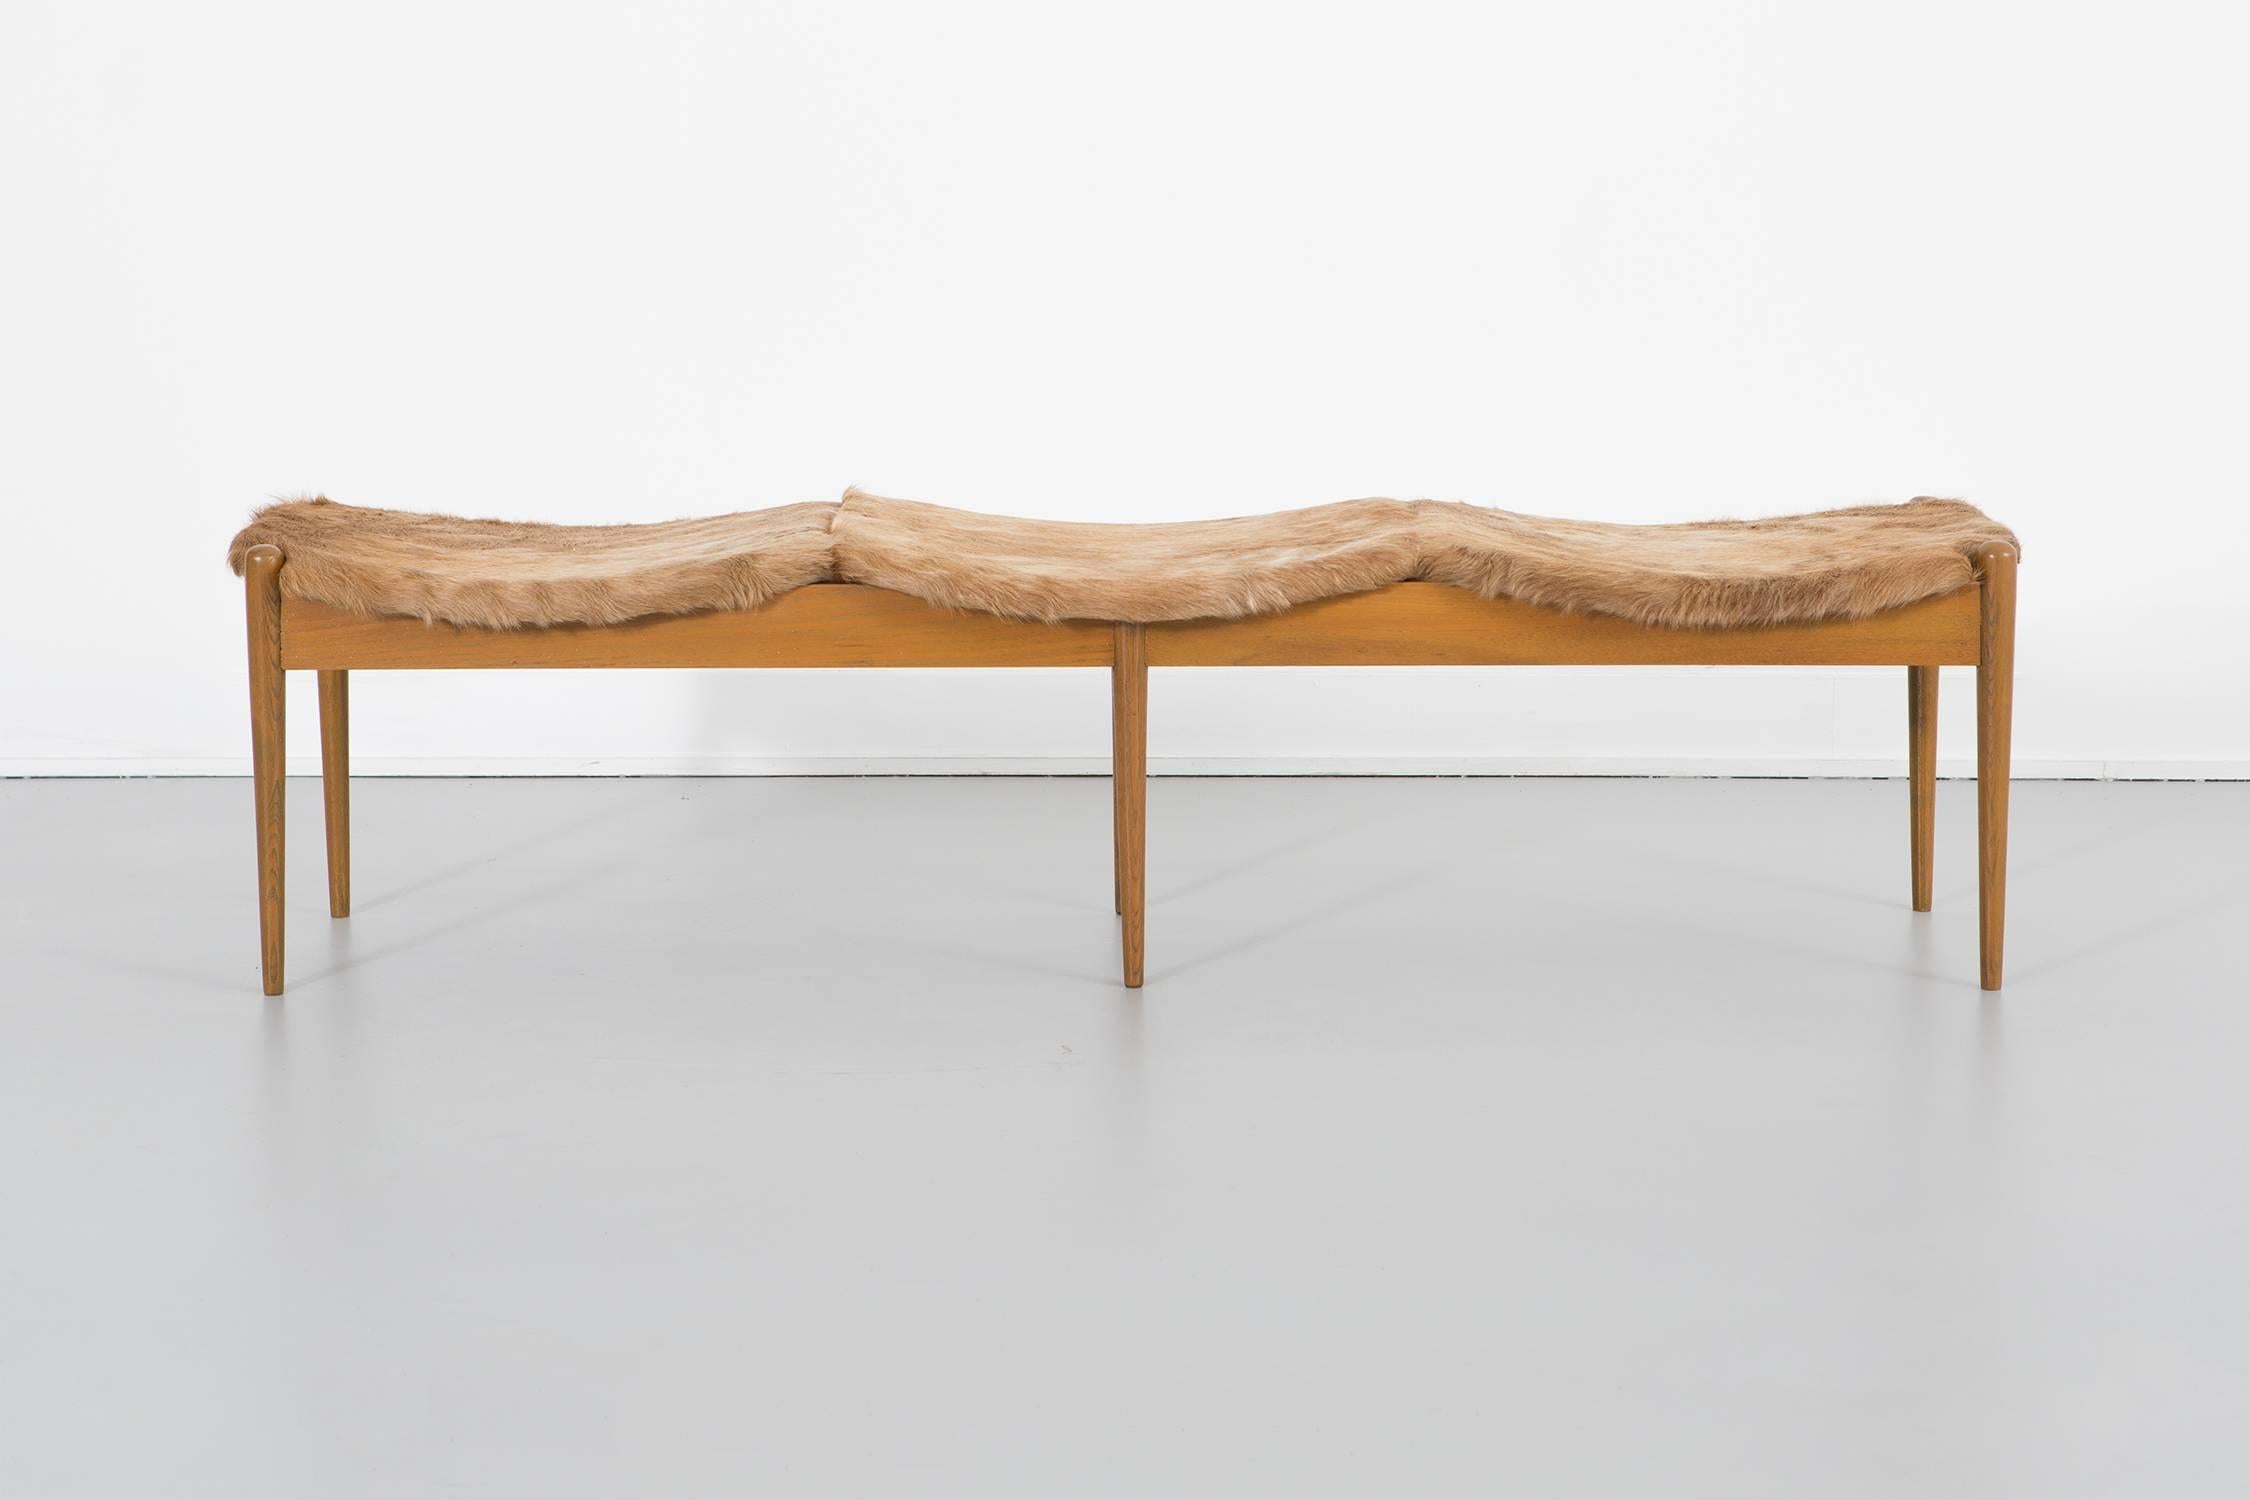 3000 Series bench

Designed by Arthur Umanoff for Washington Woodcraft

USA, circa 1960s

Walnut and Brazilian cowhide

Measures: 15 7/16” H x 60 7/16” W x 16 ½” D x seat 14 ?” H.